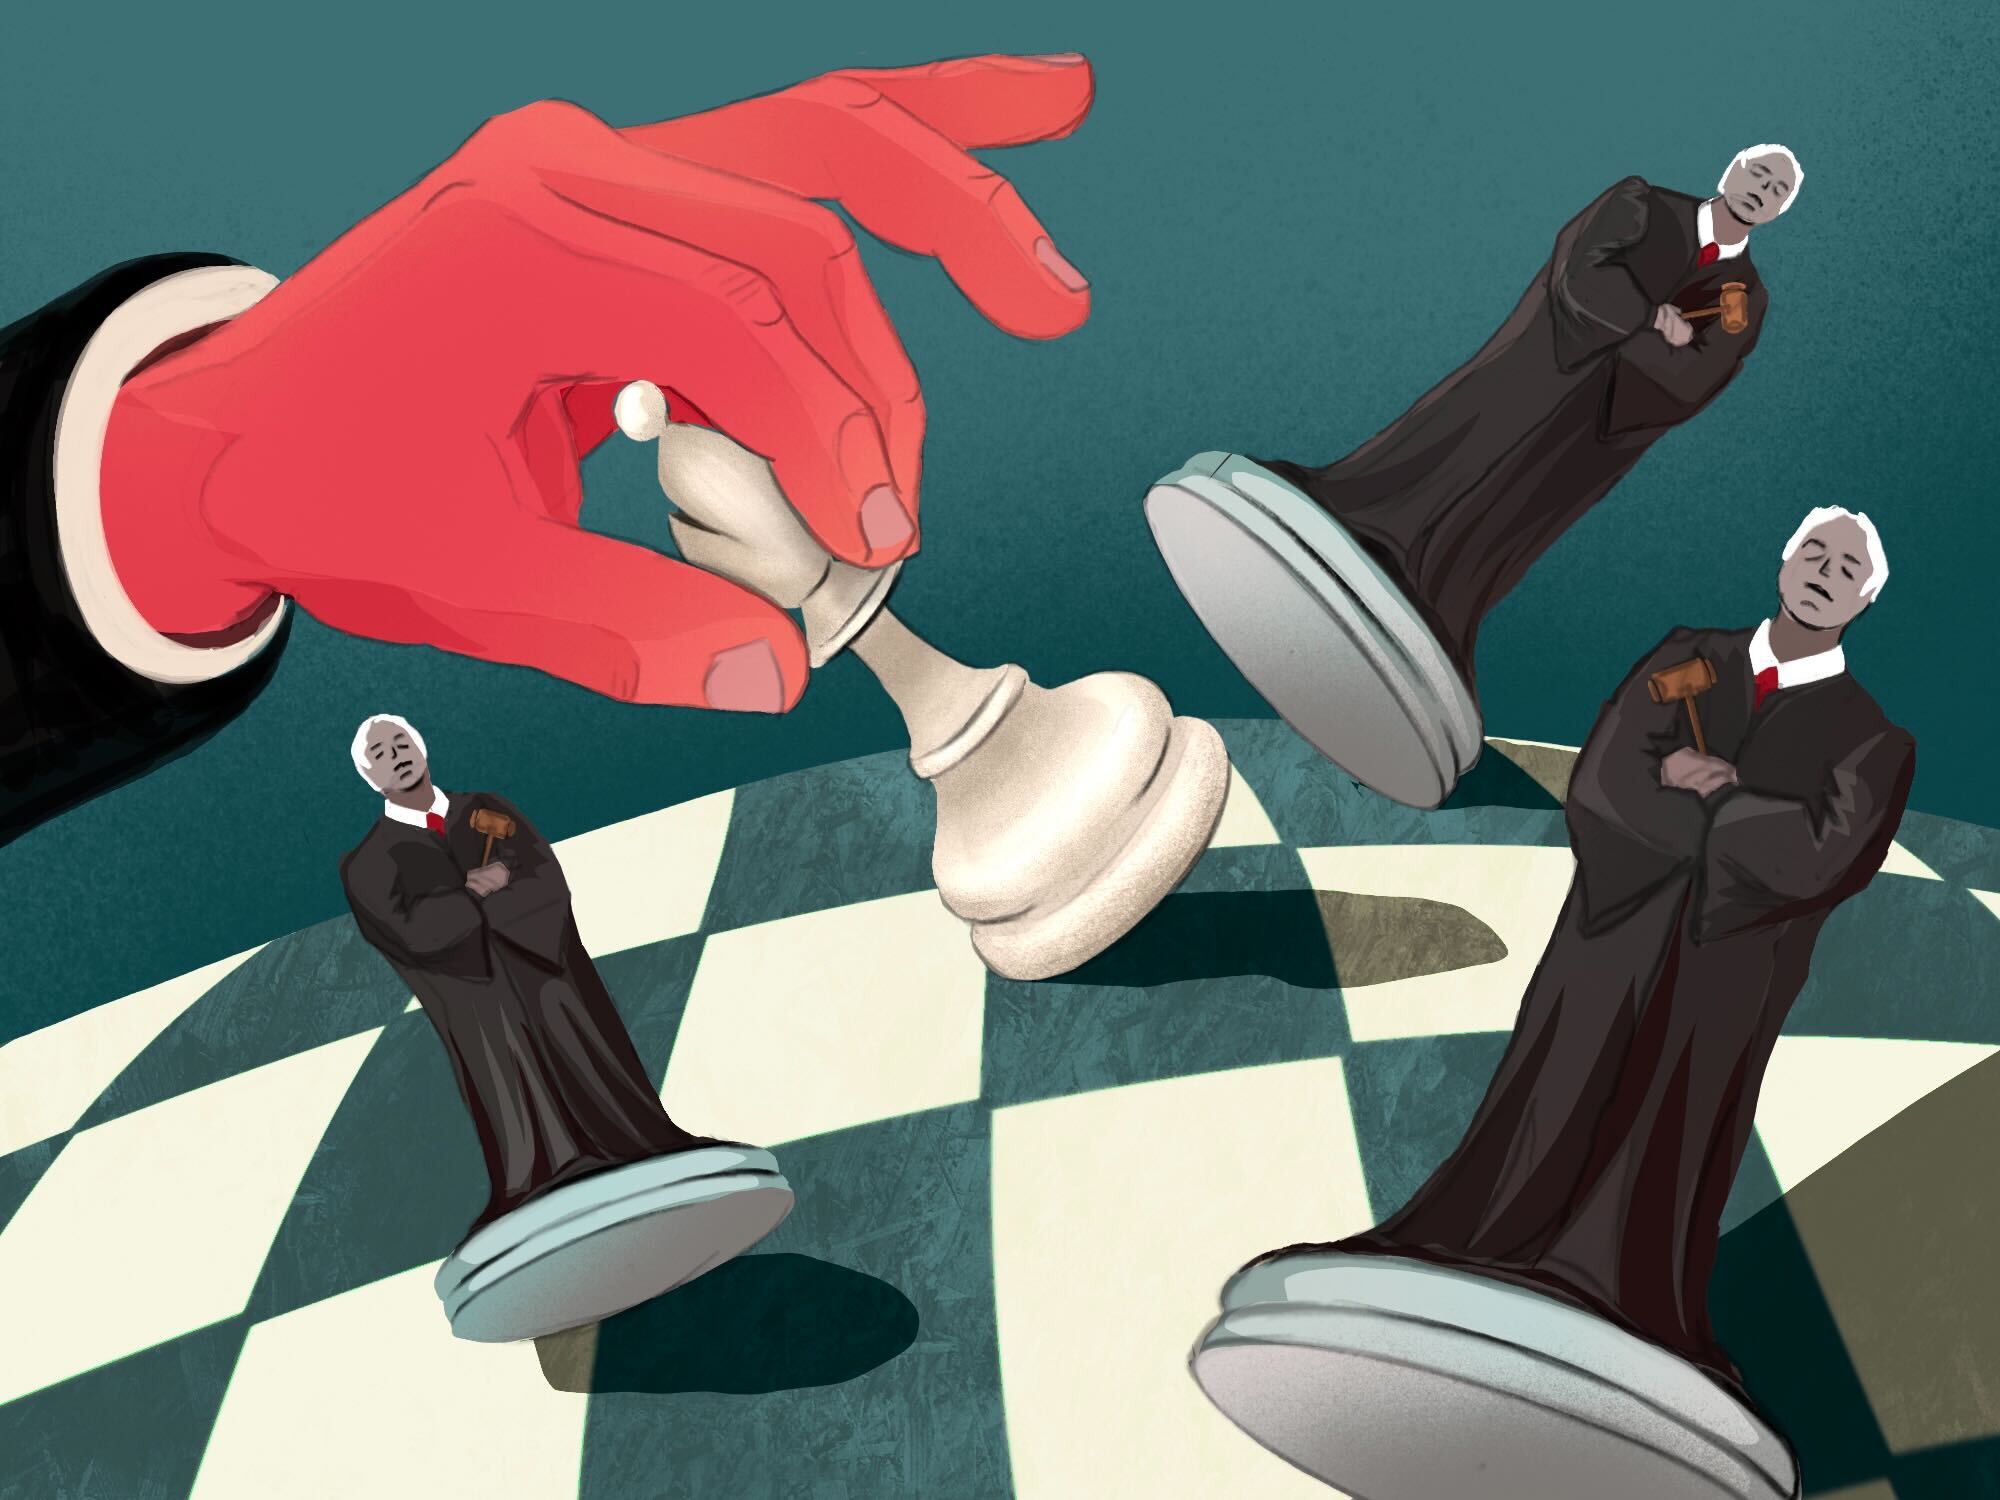 An illustration of a hand holding a pawn over a chess board. On the board there are three chess pieces that look like judges being knocked over.